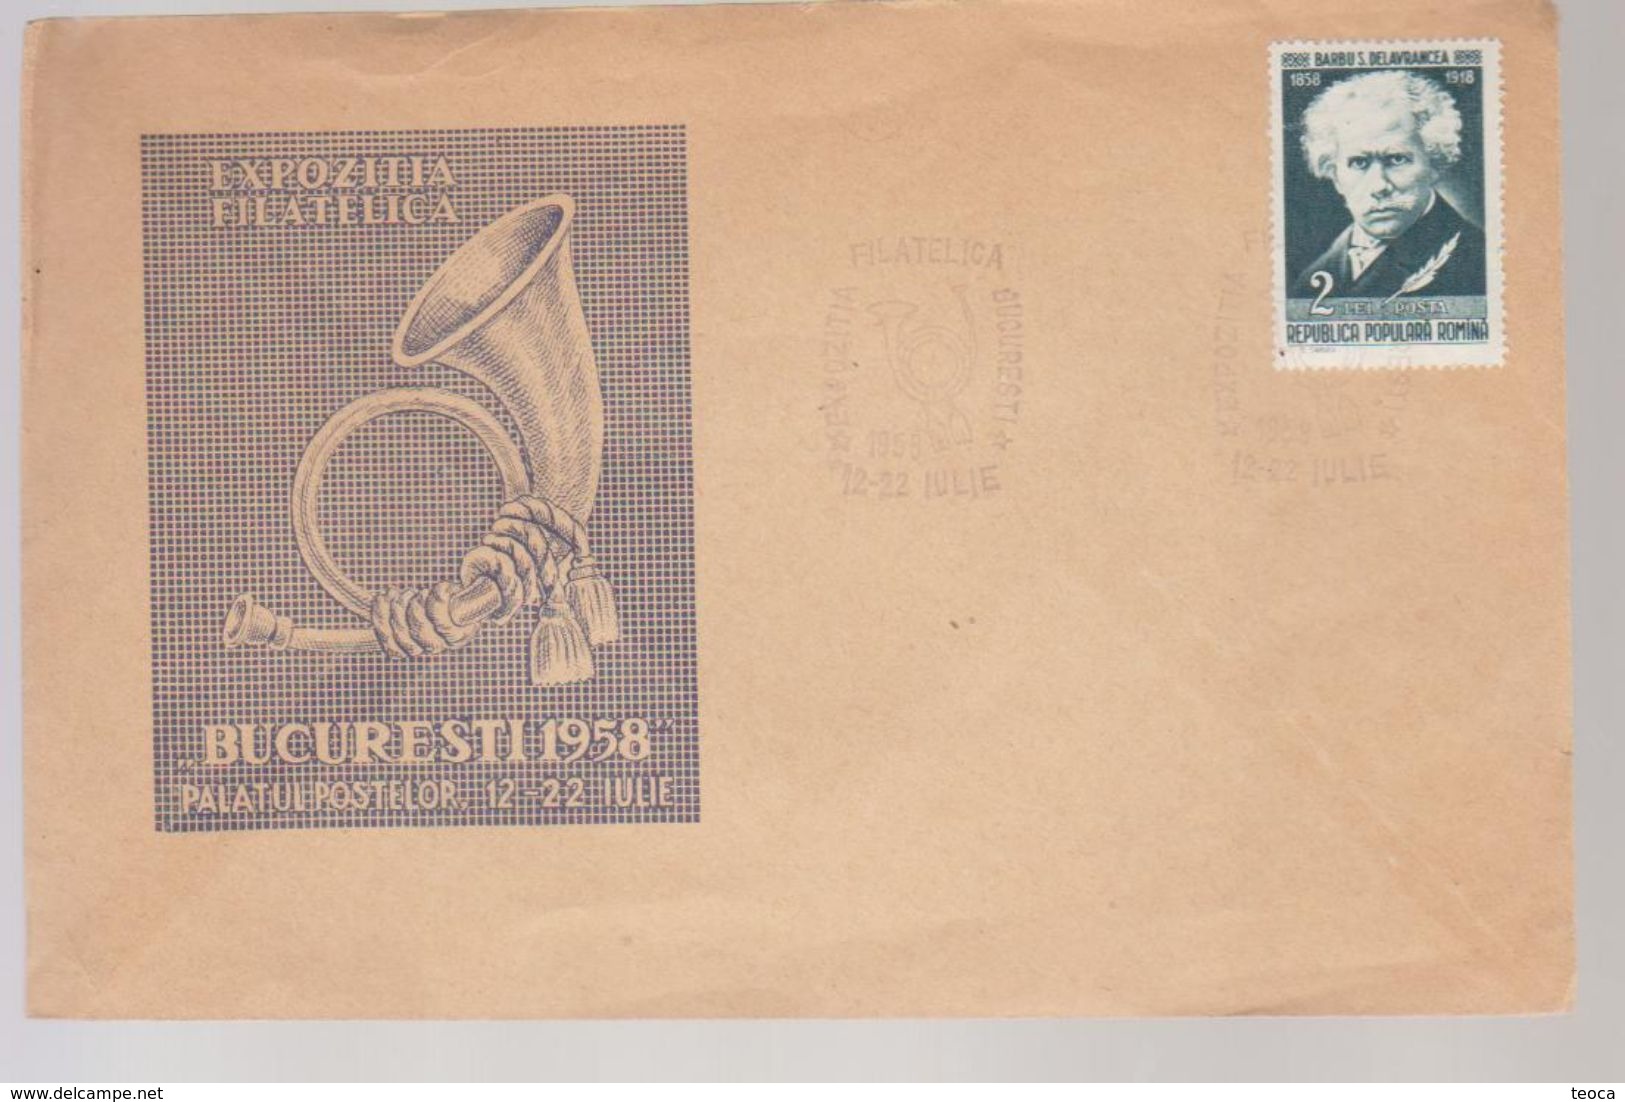 POSTHORN FDC Cover ROMANIA 1958 EXHIBITION PHILATELIC BUCURESTI 1958 , COVER SPECIAL - Covers & Documents